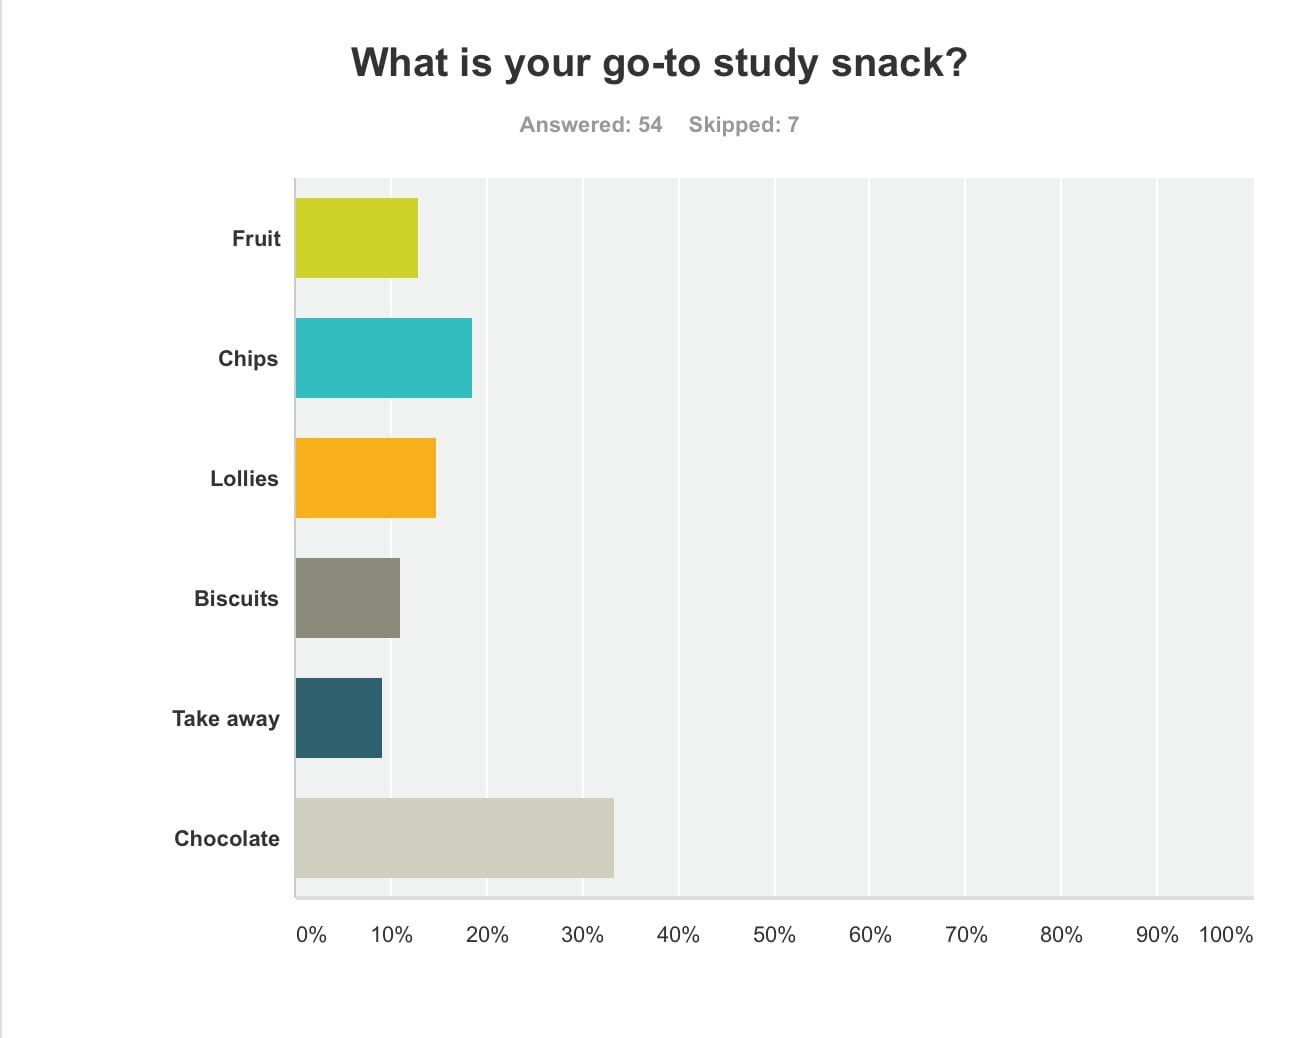 Most students snack on chocolate.